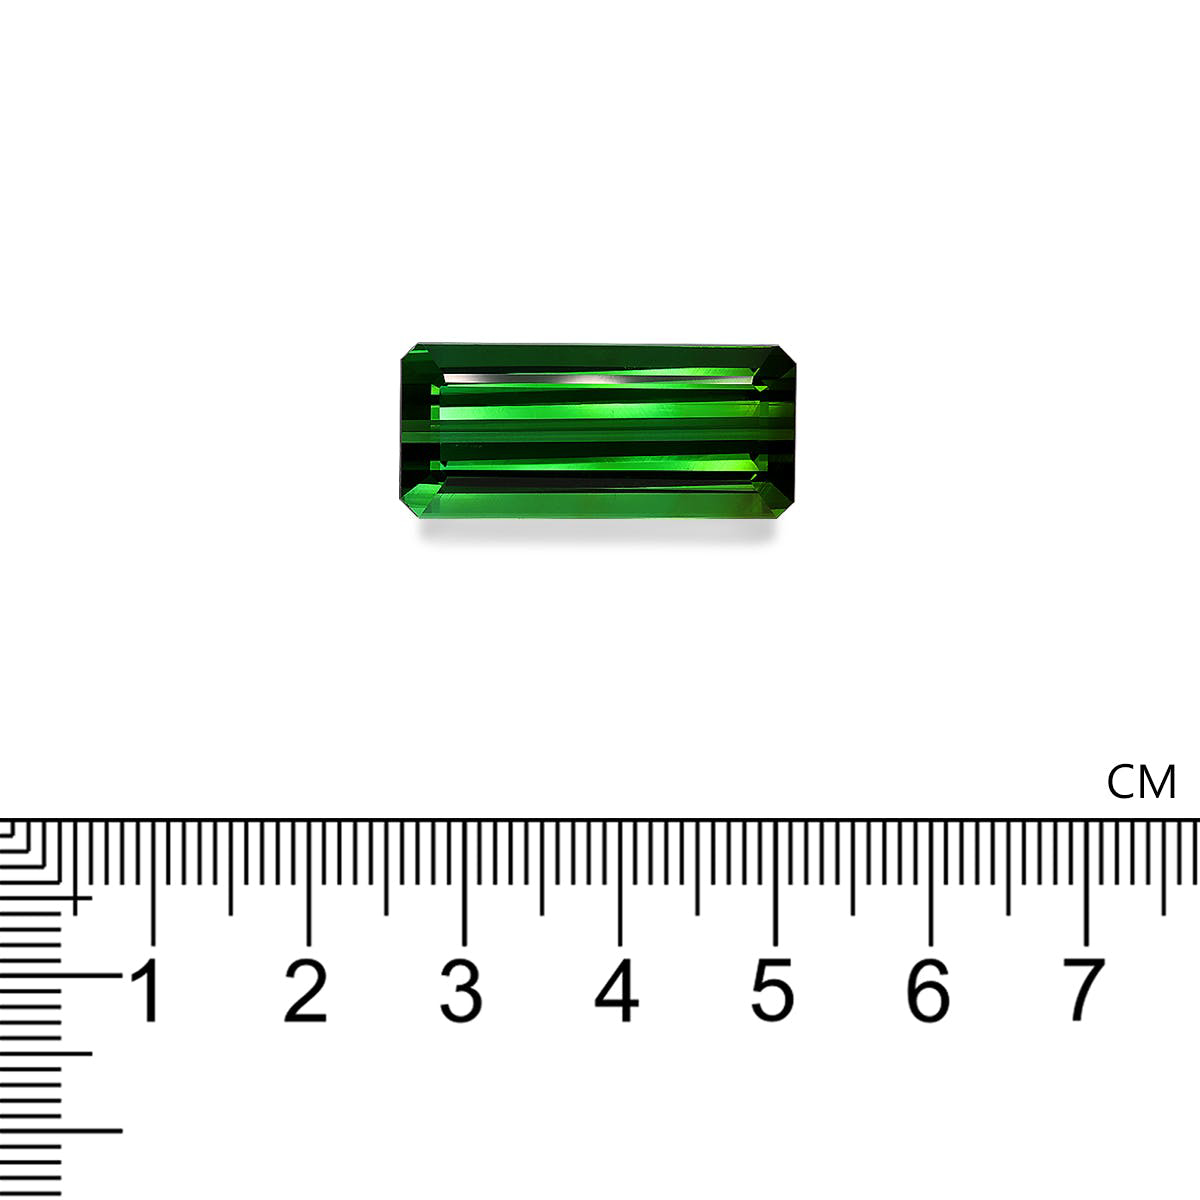 Picture of Vivid Green Tourmaline 25.60ct (TG0862)